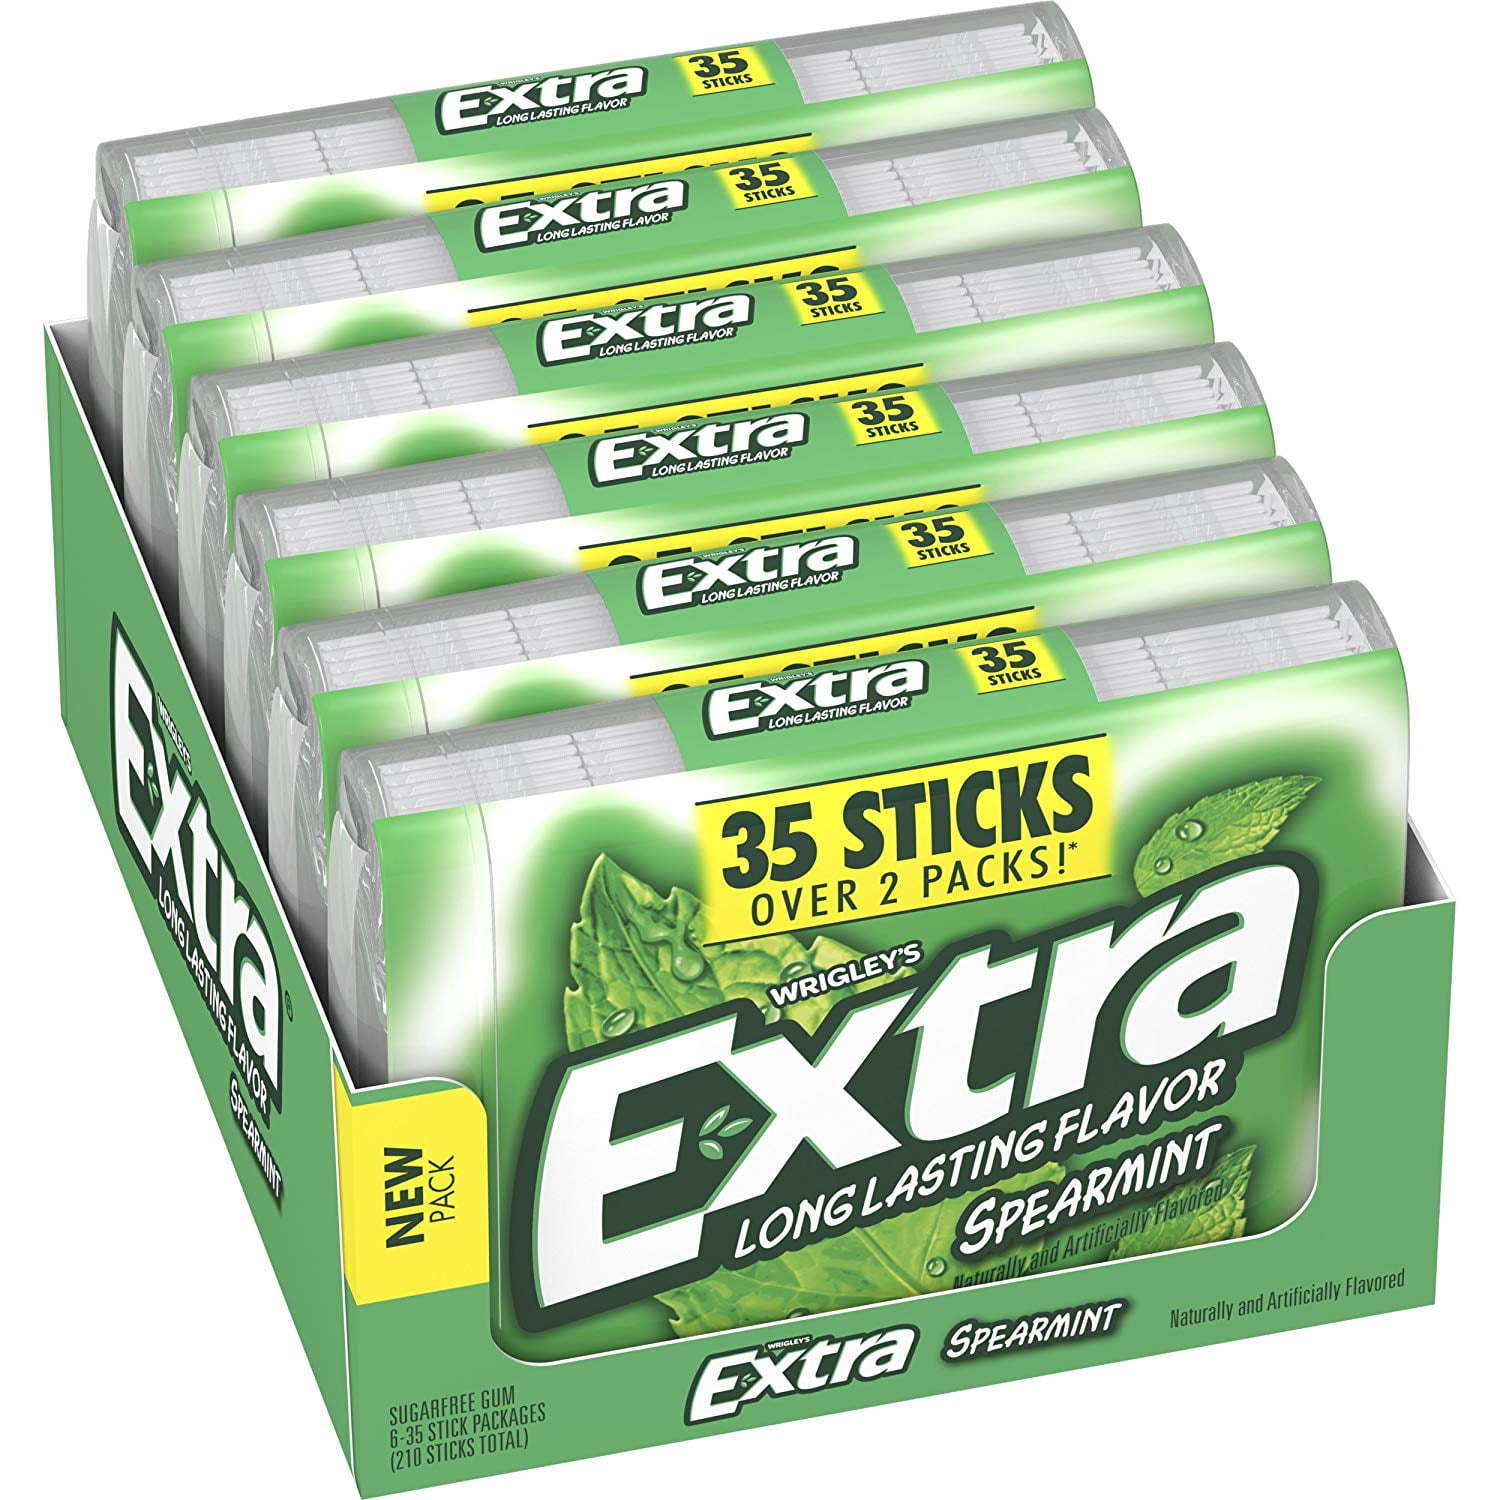 extra-spearmint-sugarfree-gum-35-count-pack-of-6-piece-walmart